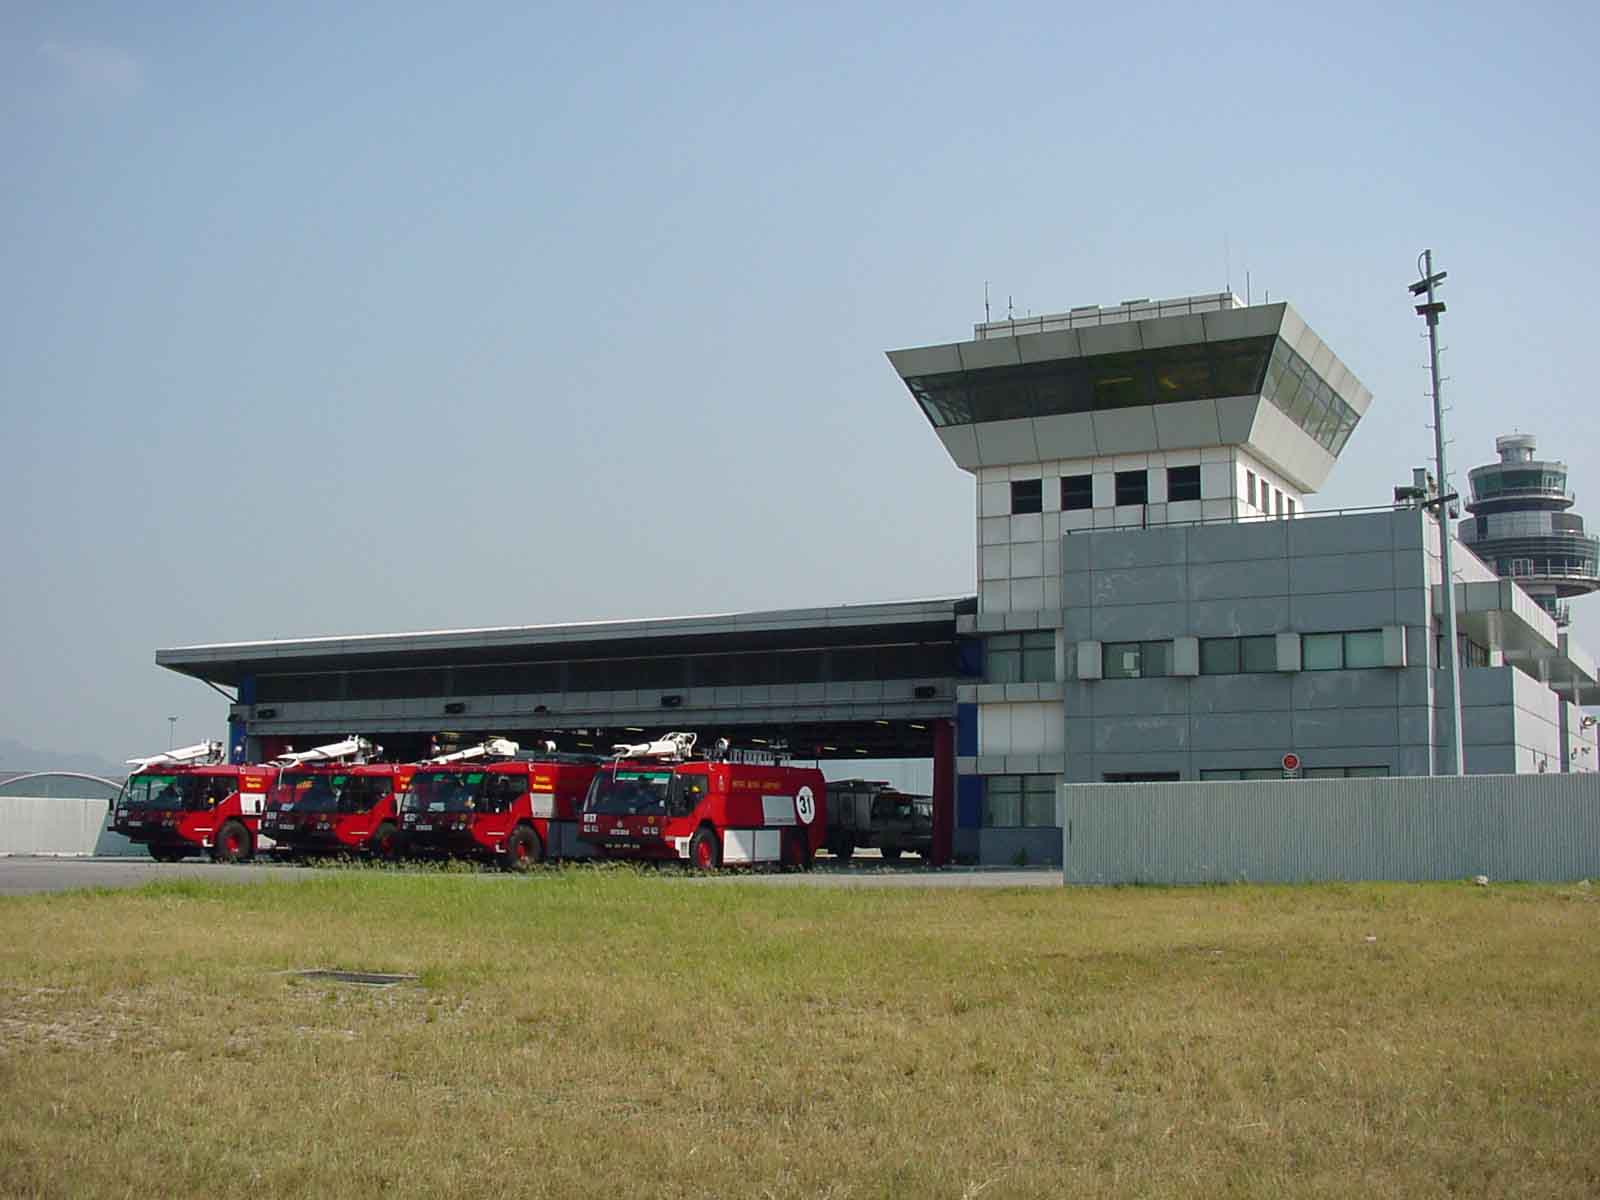 Front View of Sub Airport Fire Station with Backup Air Traffic Control Complex at the Rear